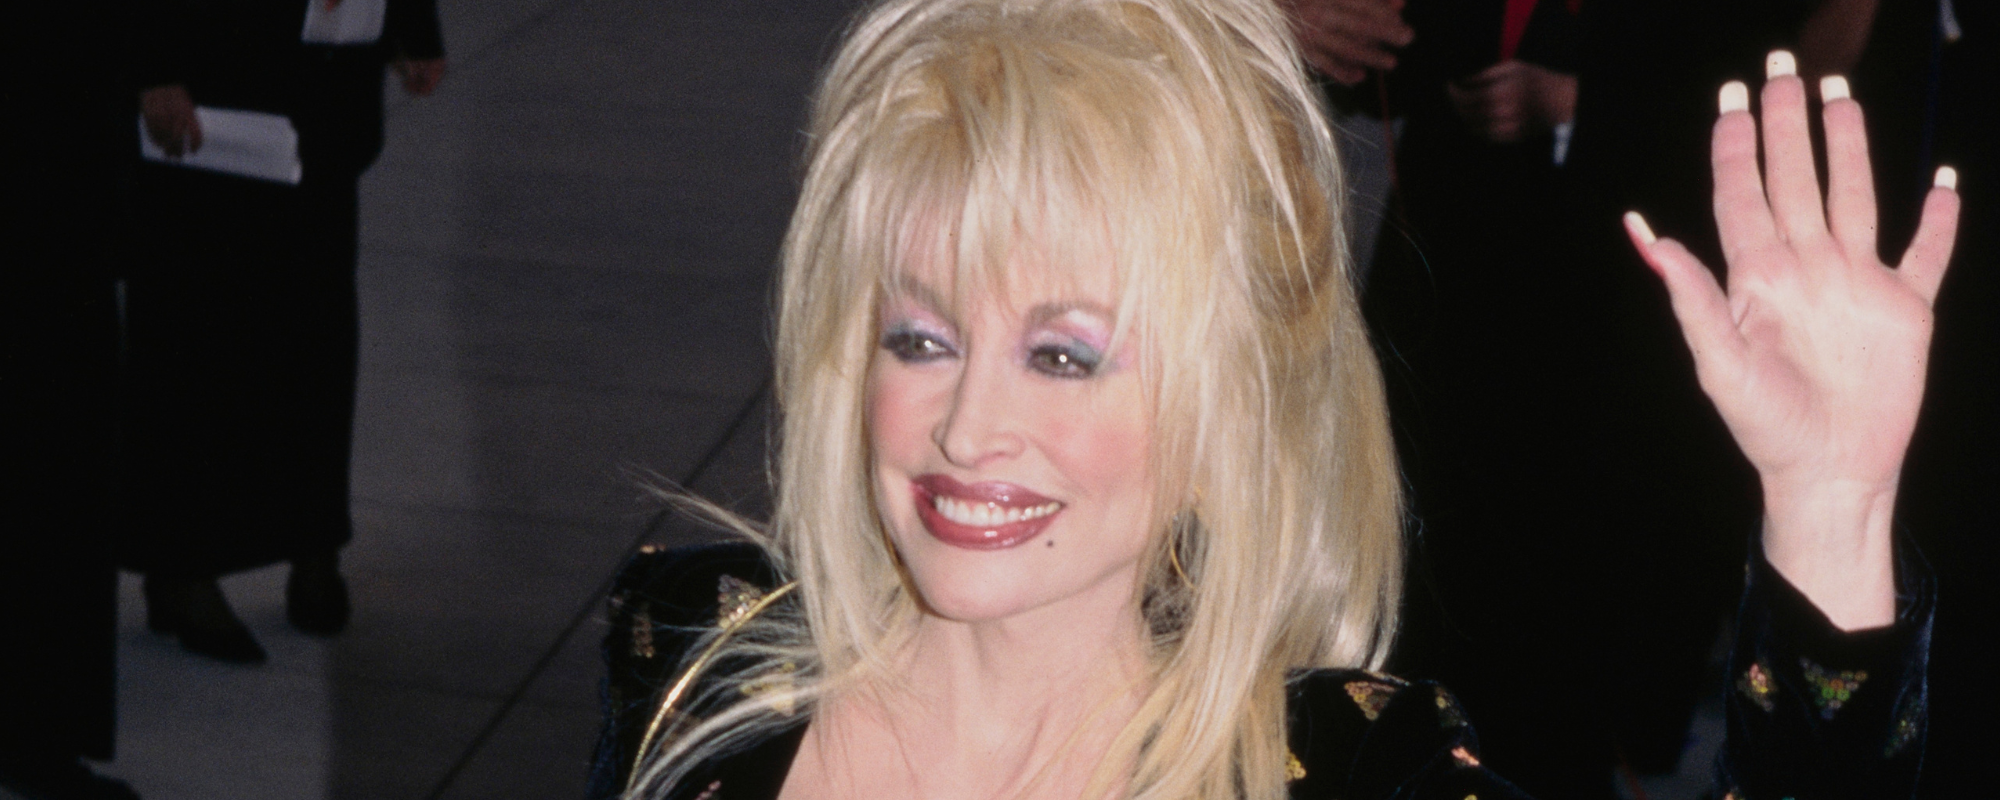 Dolly Parton Songs You Didn’t Know Dolly Parton Didn’t Write